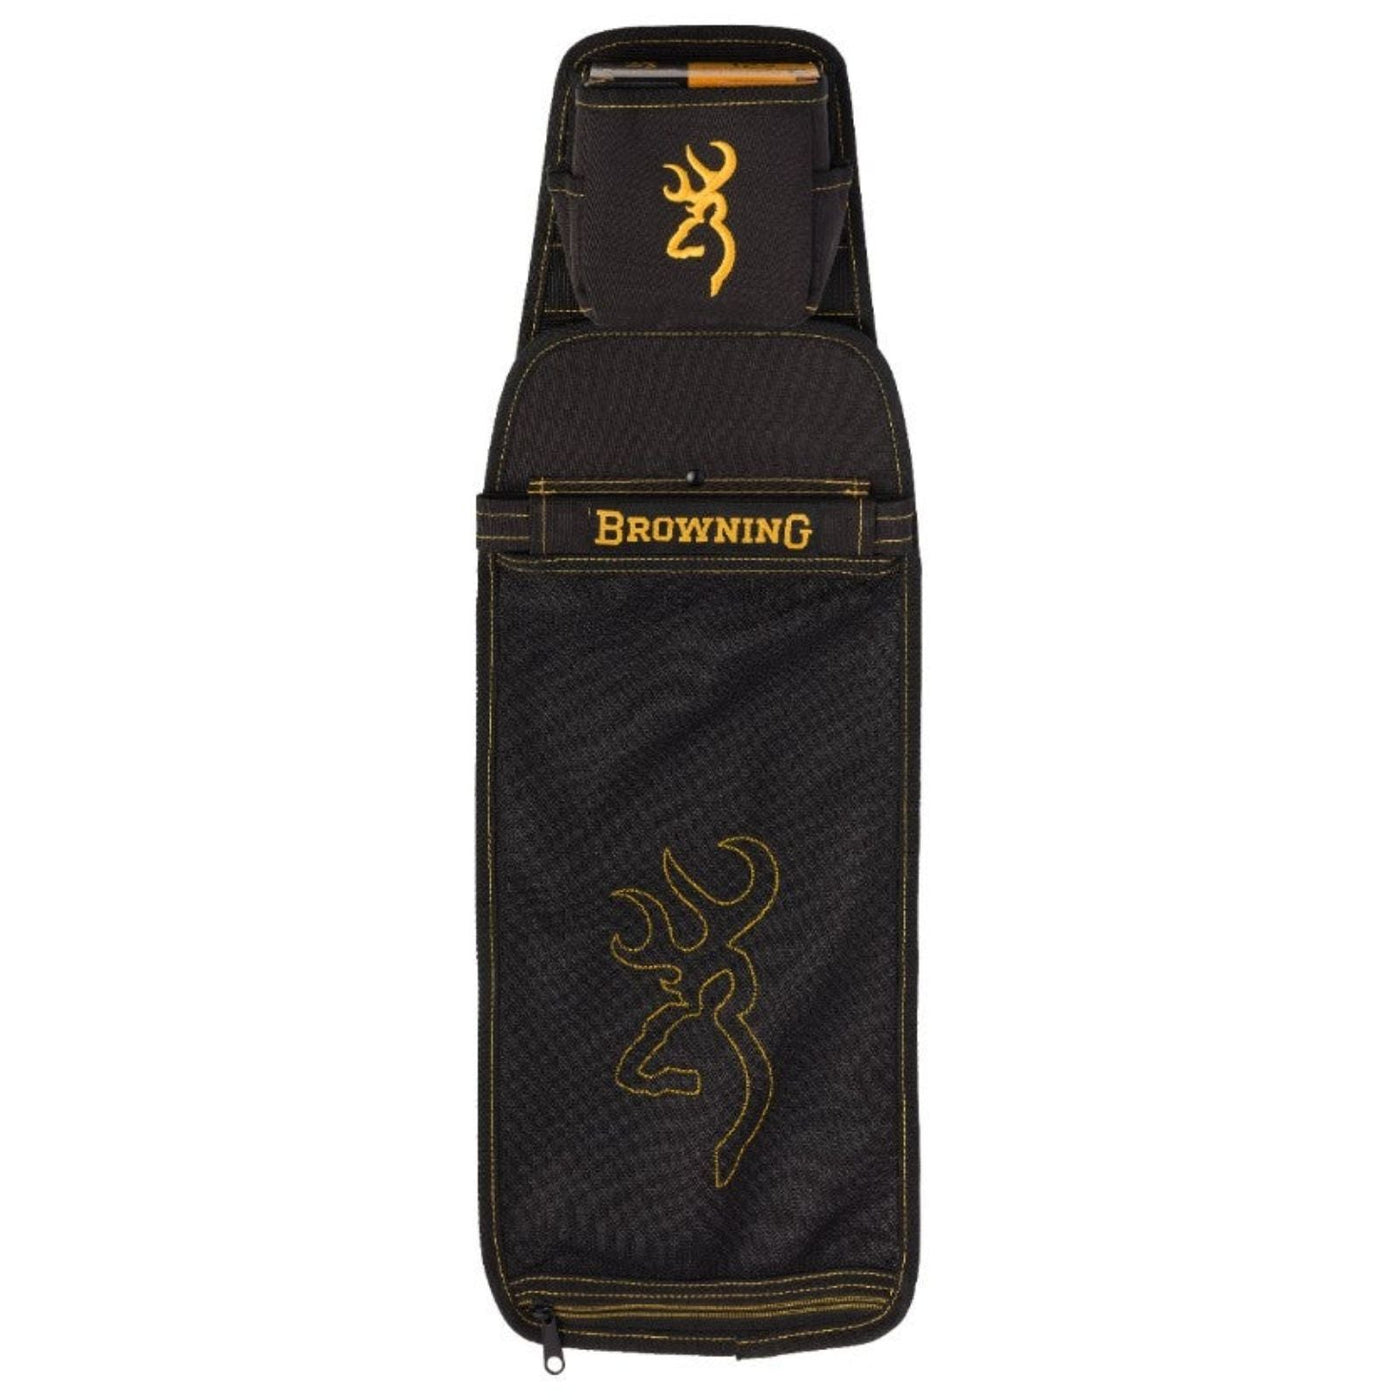 Browning Browning Black and Gold Shell Pouch Shooting